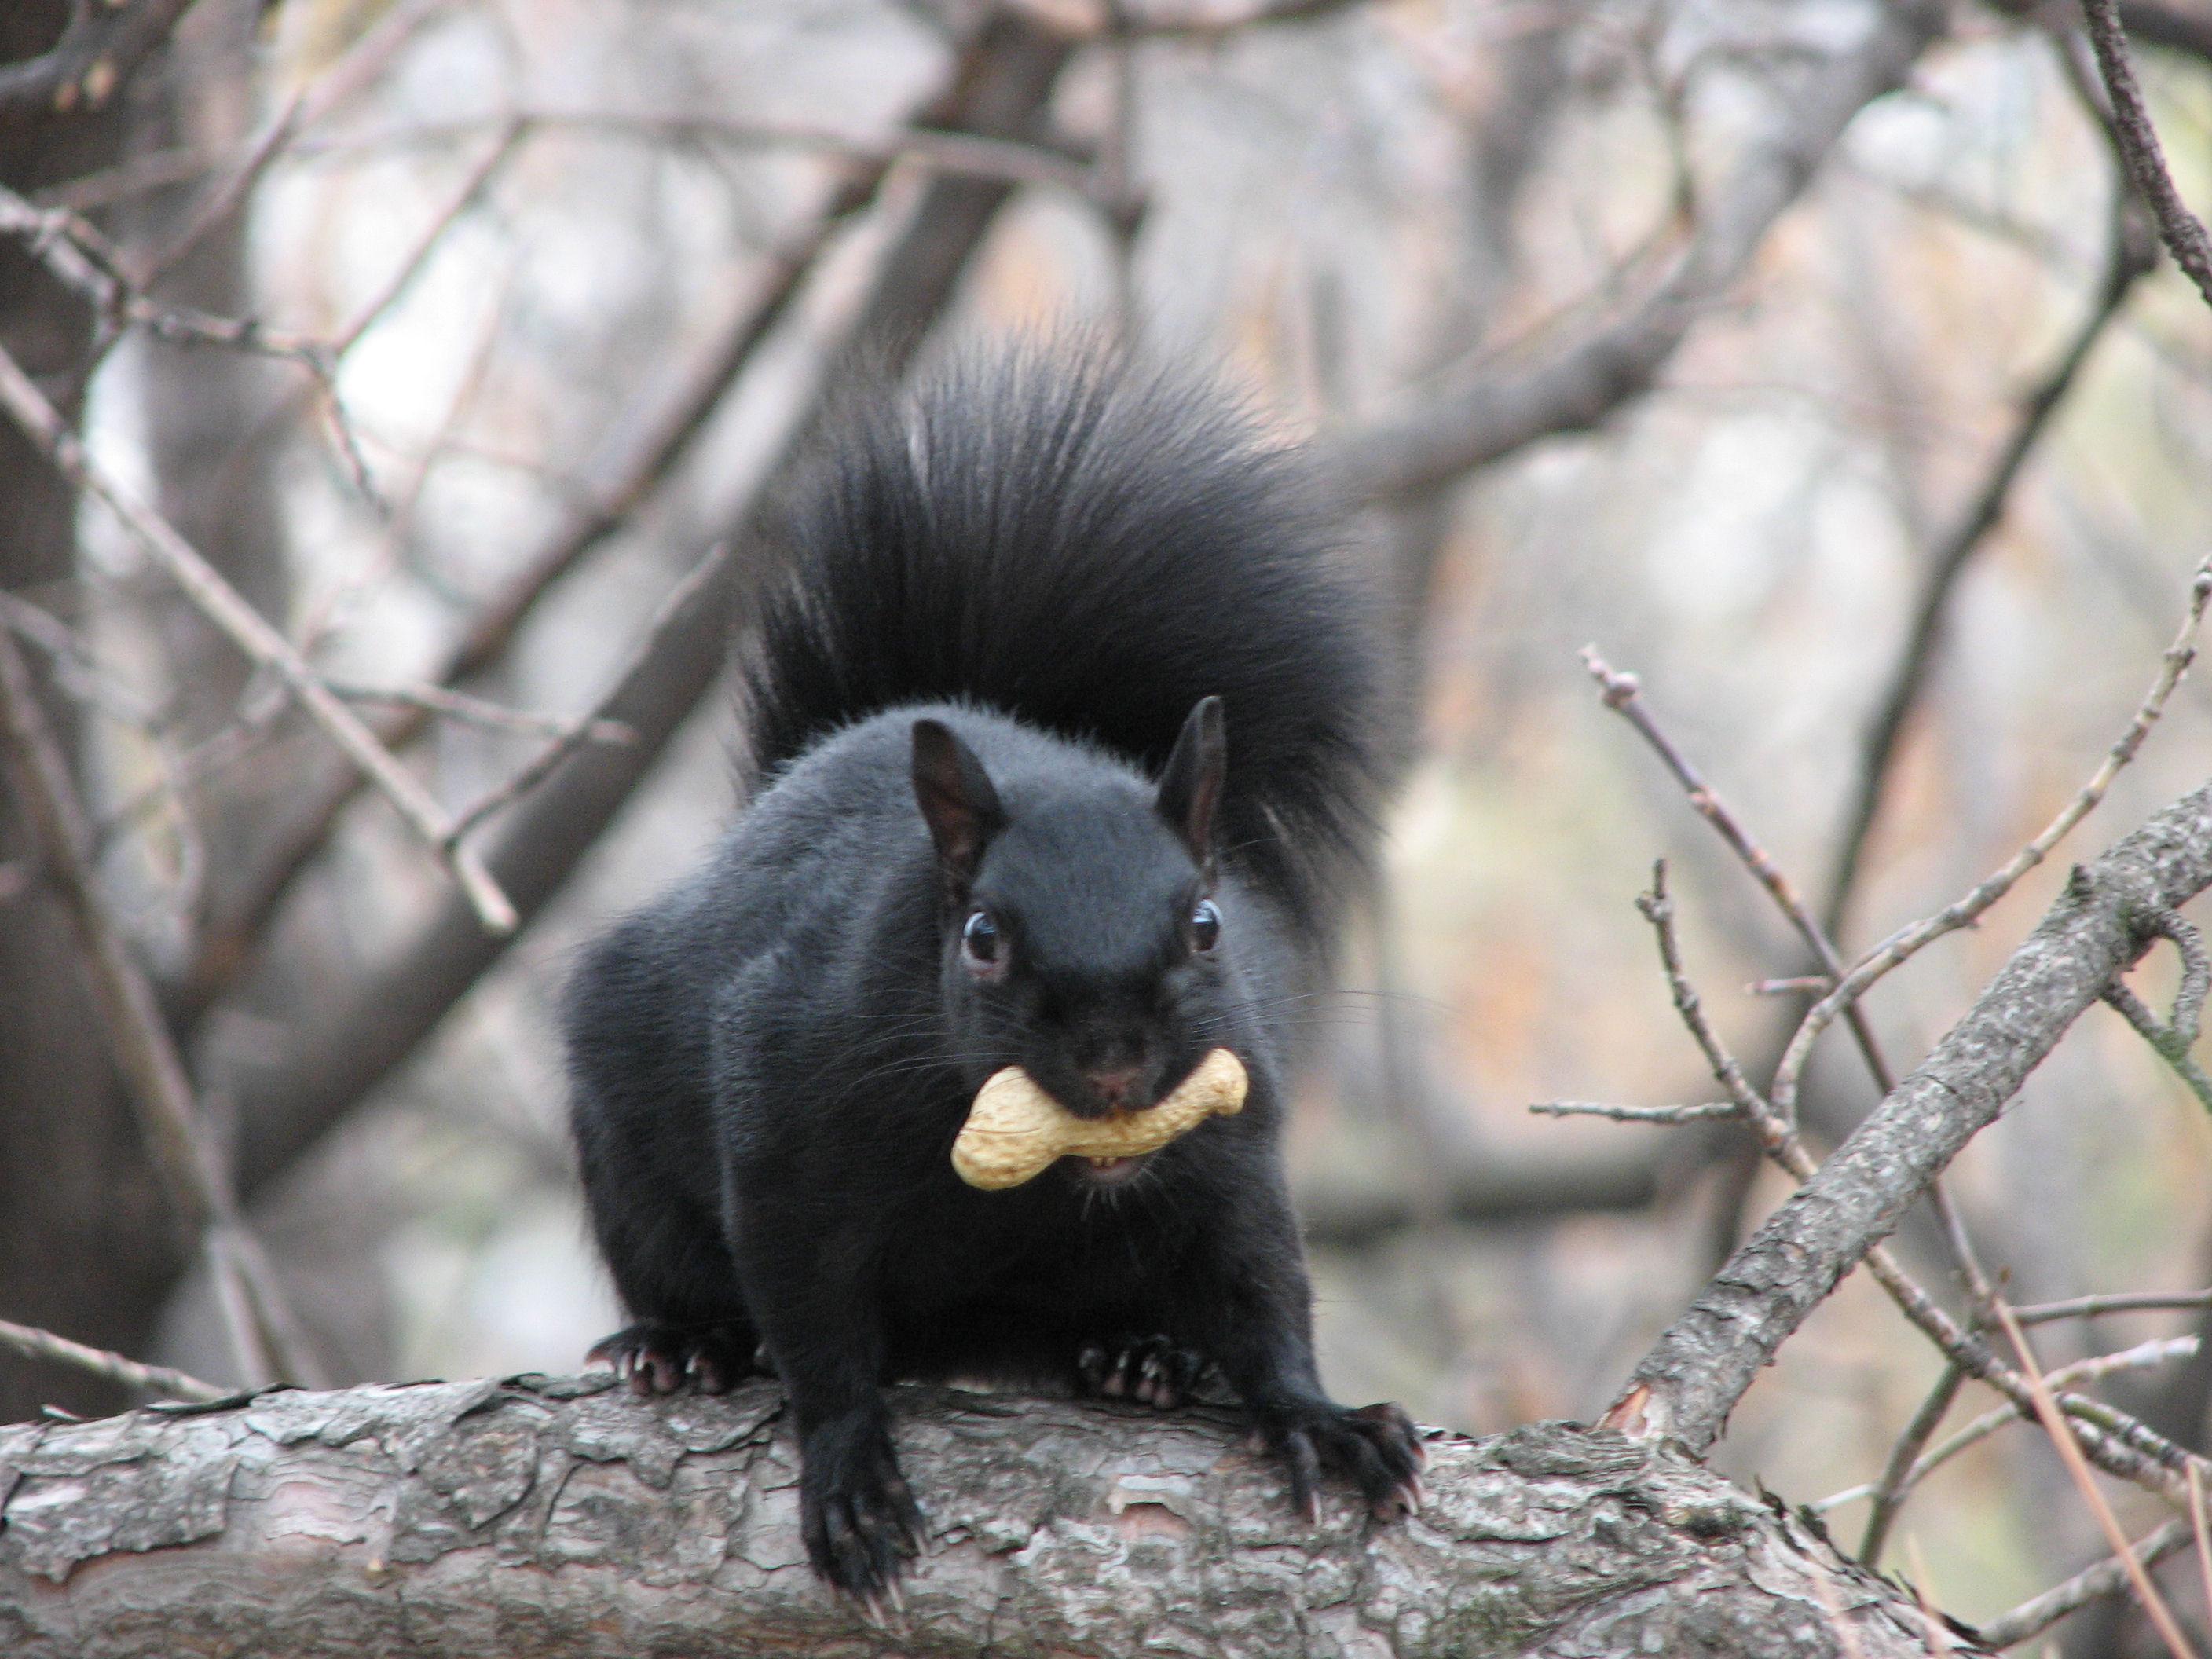 Recently Chicago residents have reported seeing black squirrels, which are more common along the U.S.-Canadian border, according to Steve Sullivan, co-director of Project Squirrel. This photo was taken in Ottawa. (Gordon E. Robertson / Wikimedia Commons)